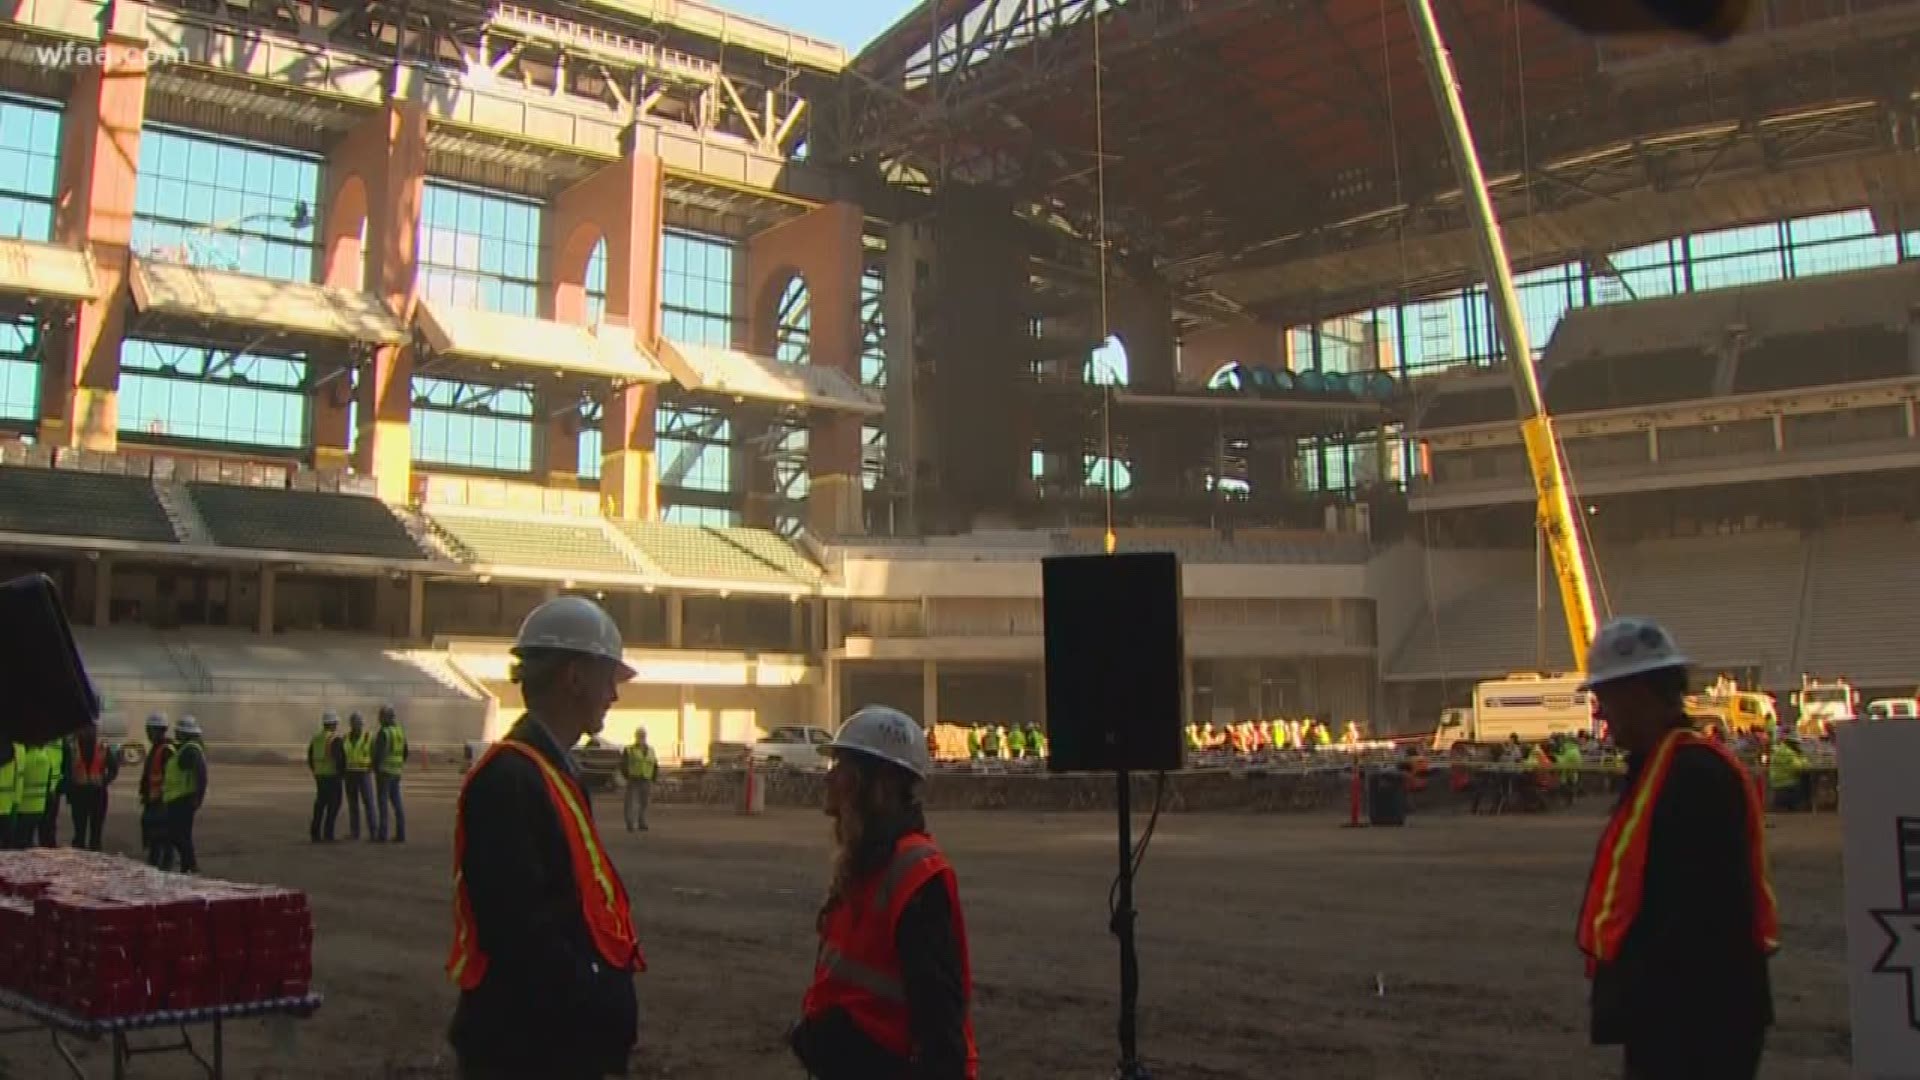 The new stadium is expected to open by mid-March. Officials say the construction remains on track despite a fire that broke out over the weekend.